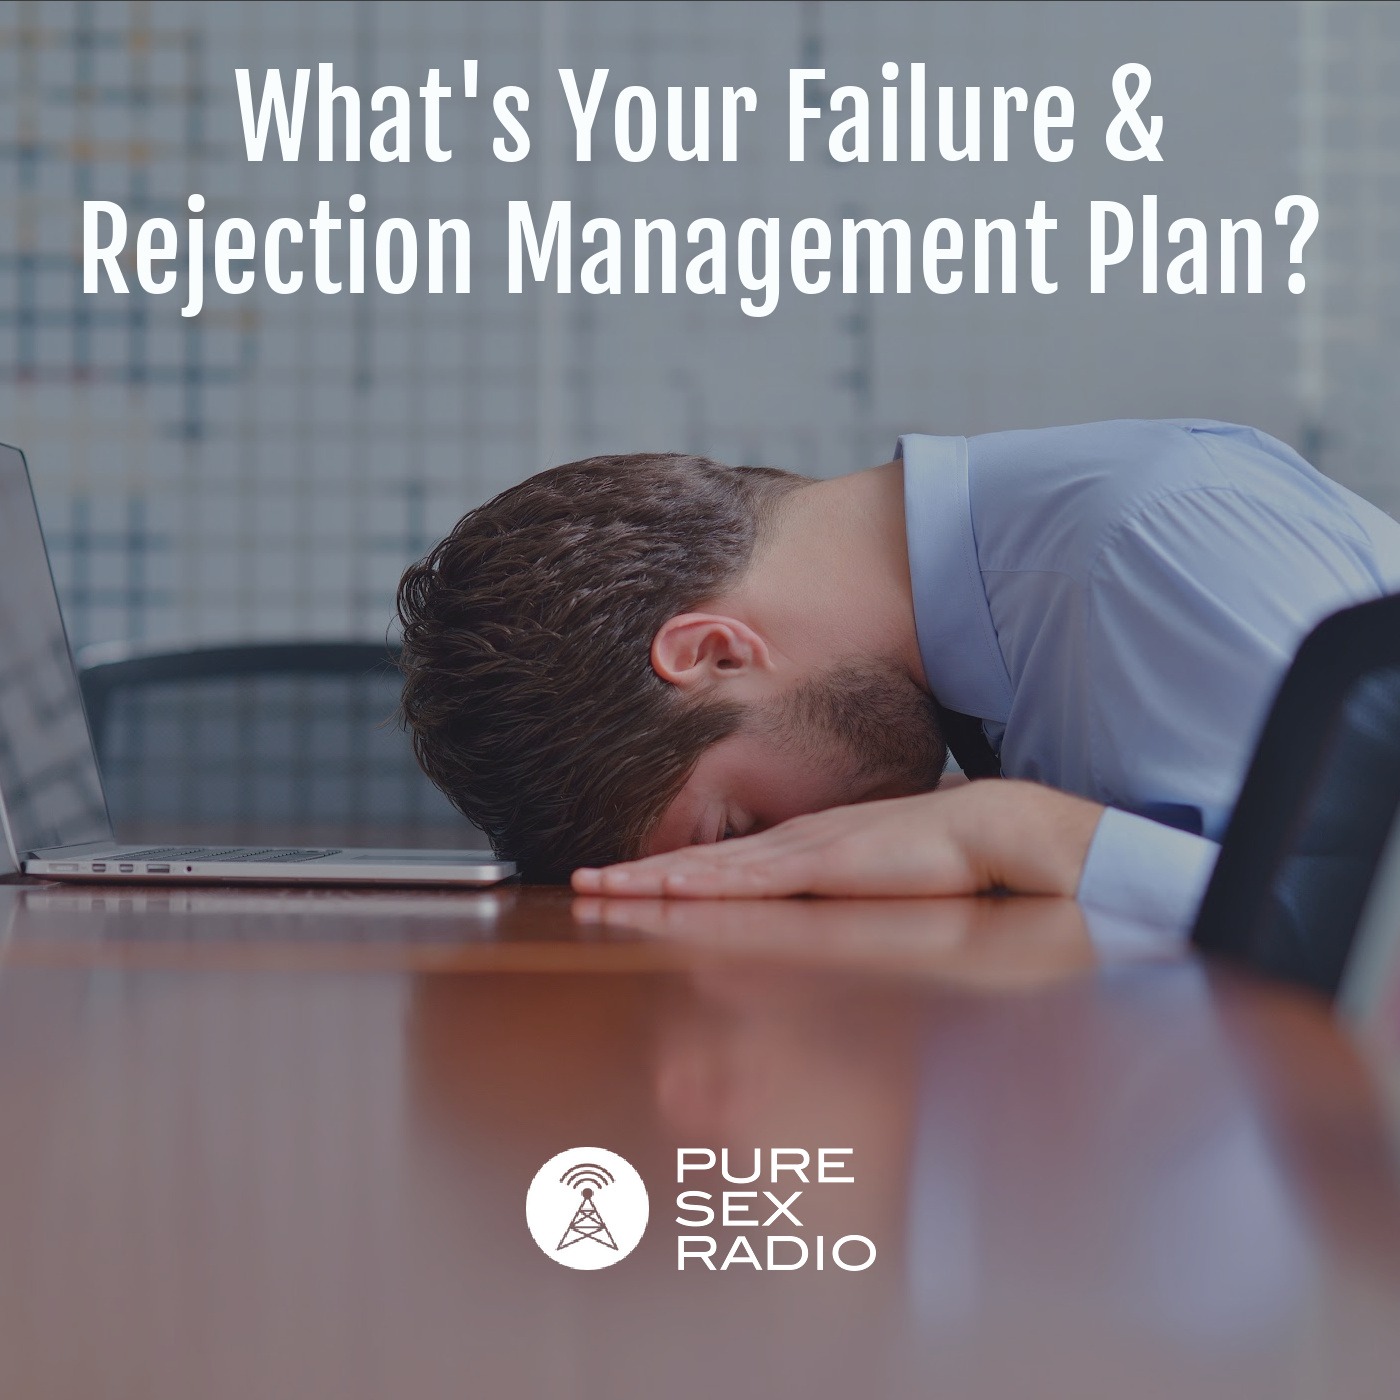 What’s Your Failure and Rejection Management Plan?